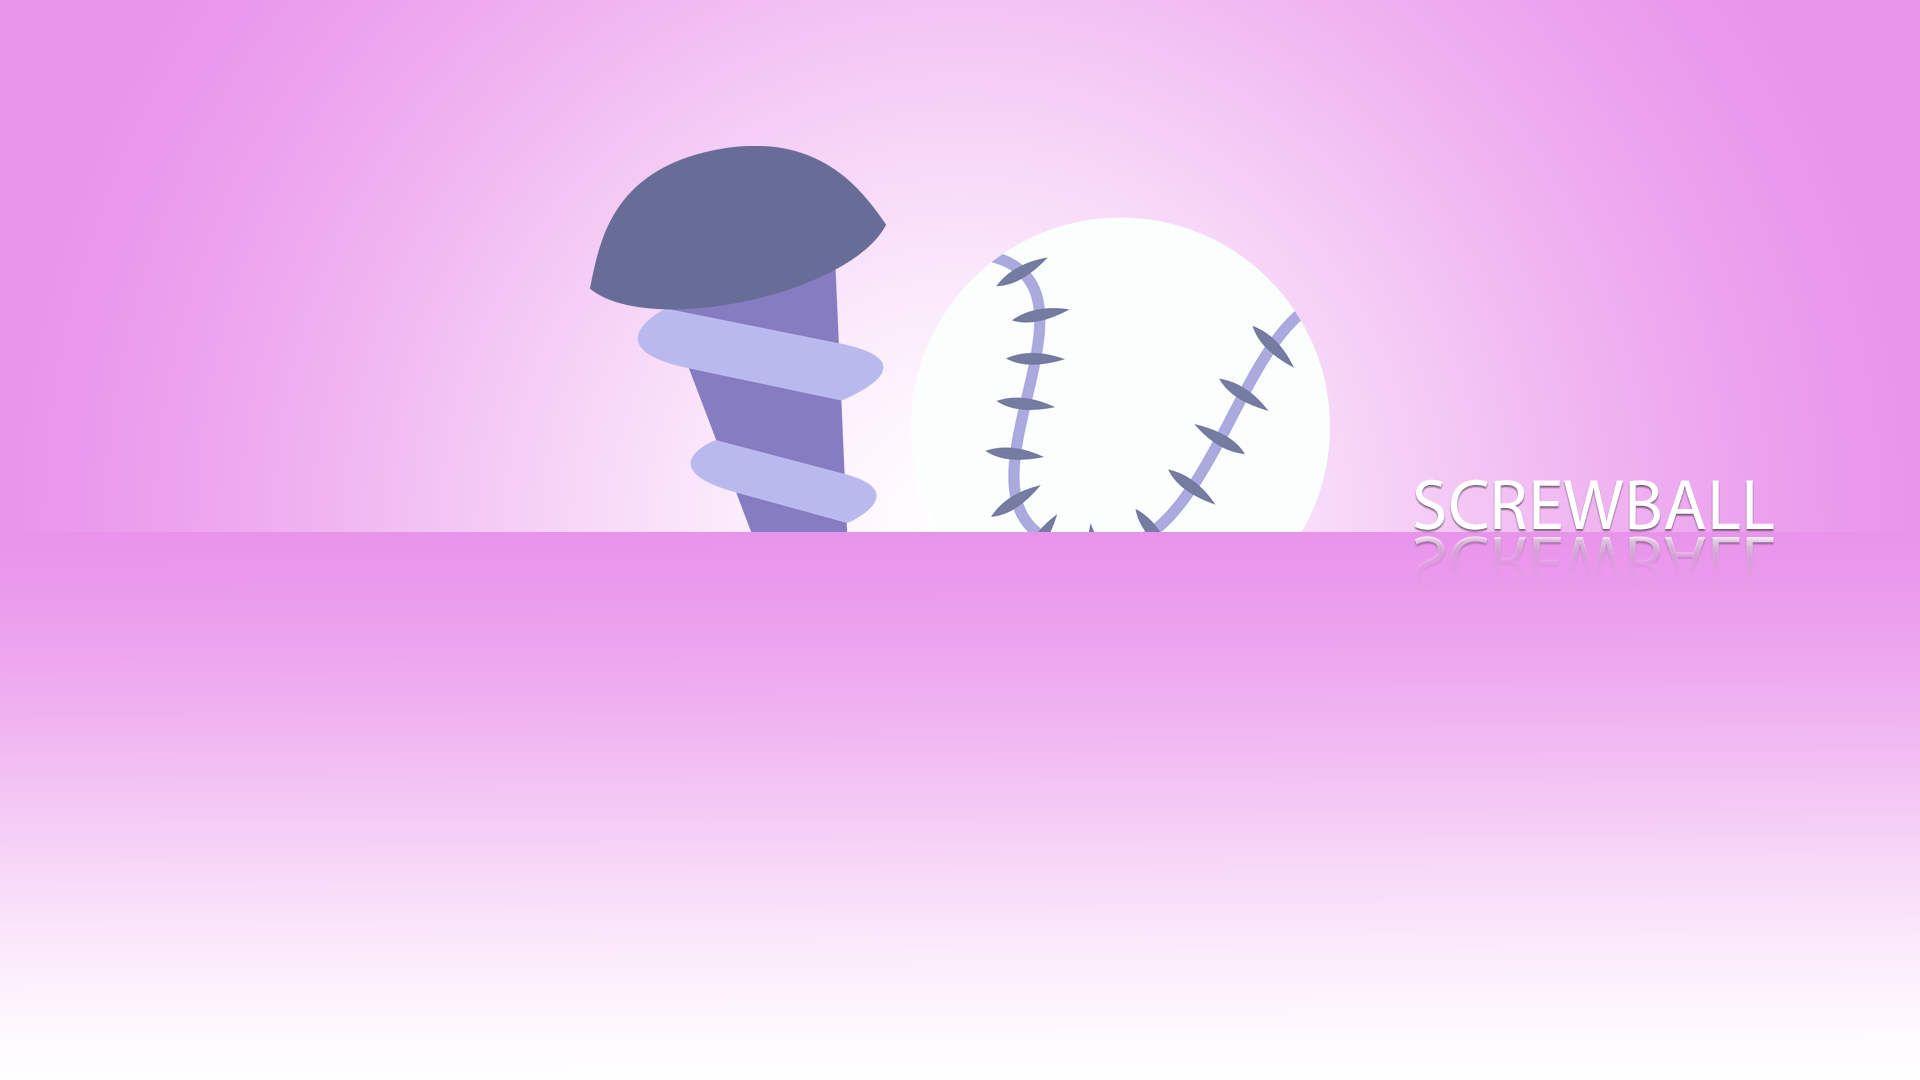 Screwball Minimalistic Wallpaper by BlueDragonHans and The-Smiling-Pony